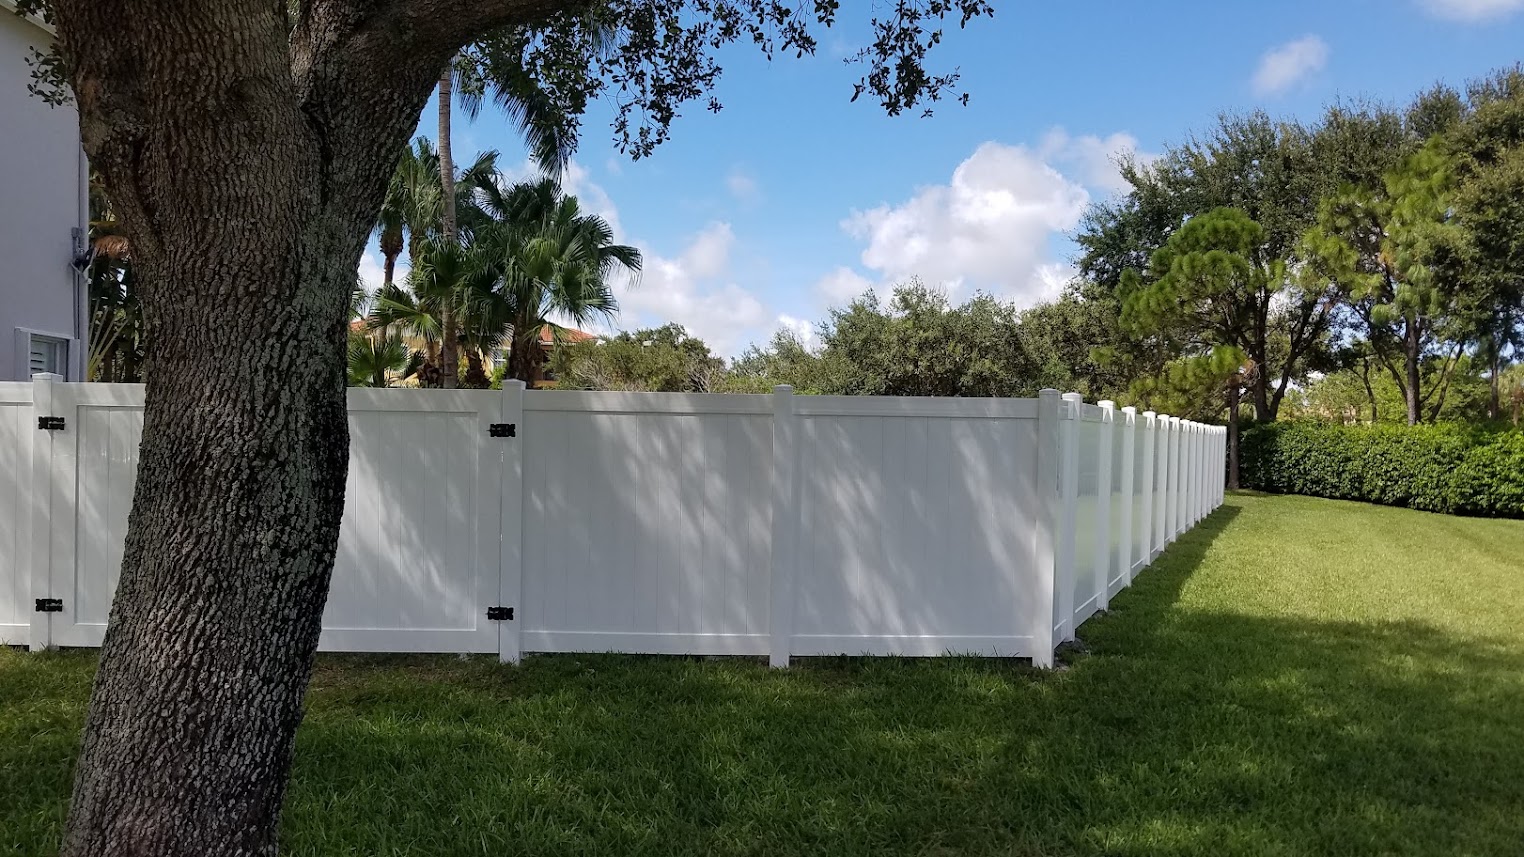 How Long Does a Vinyl Fence Last in Florida on Average?